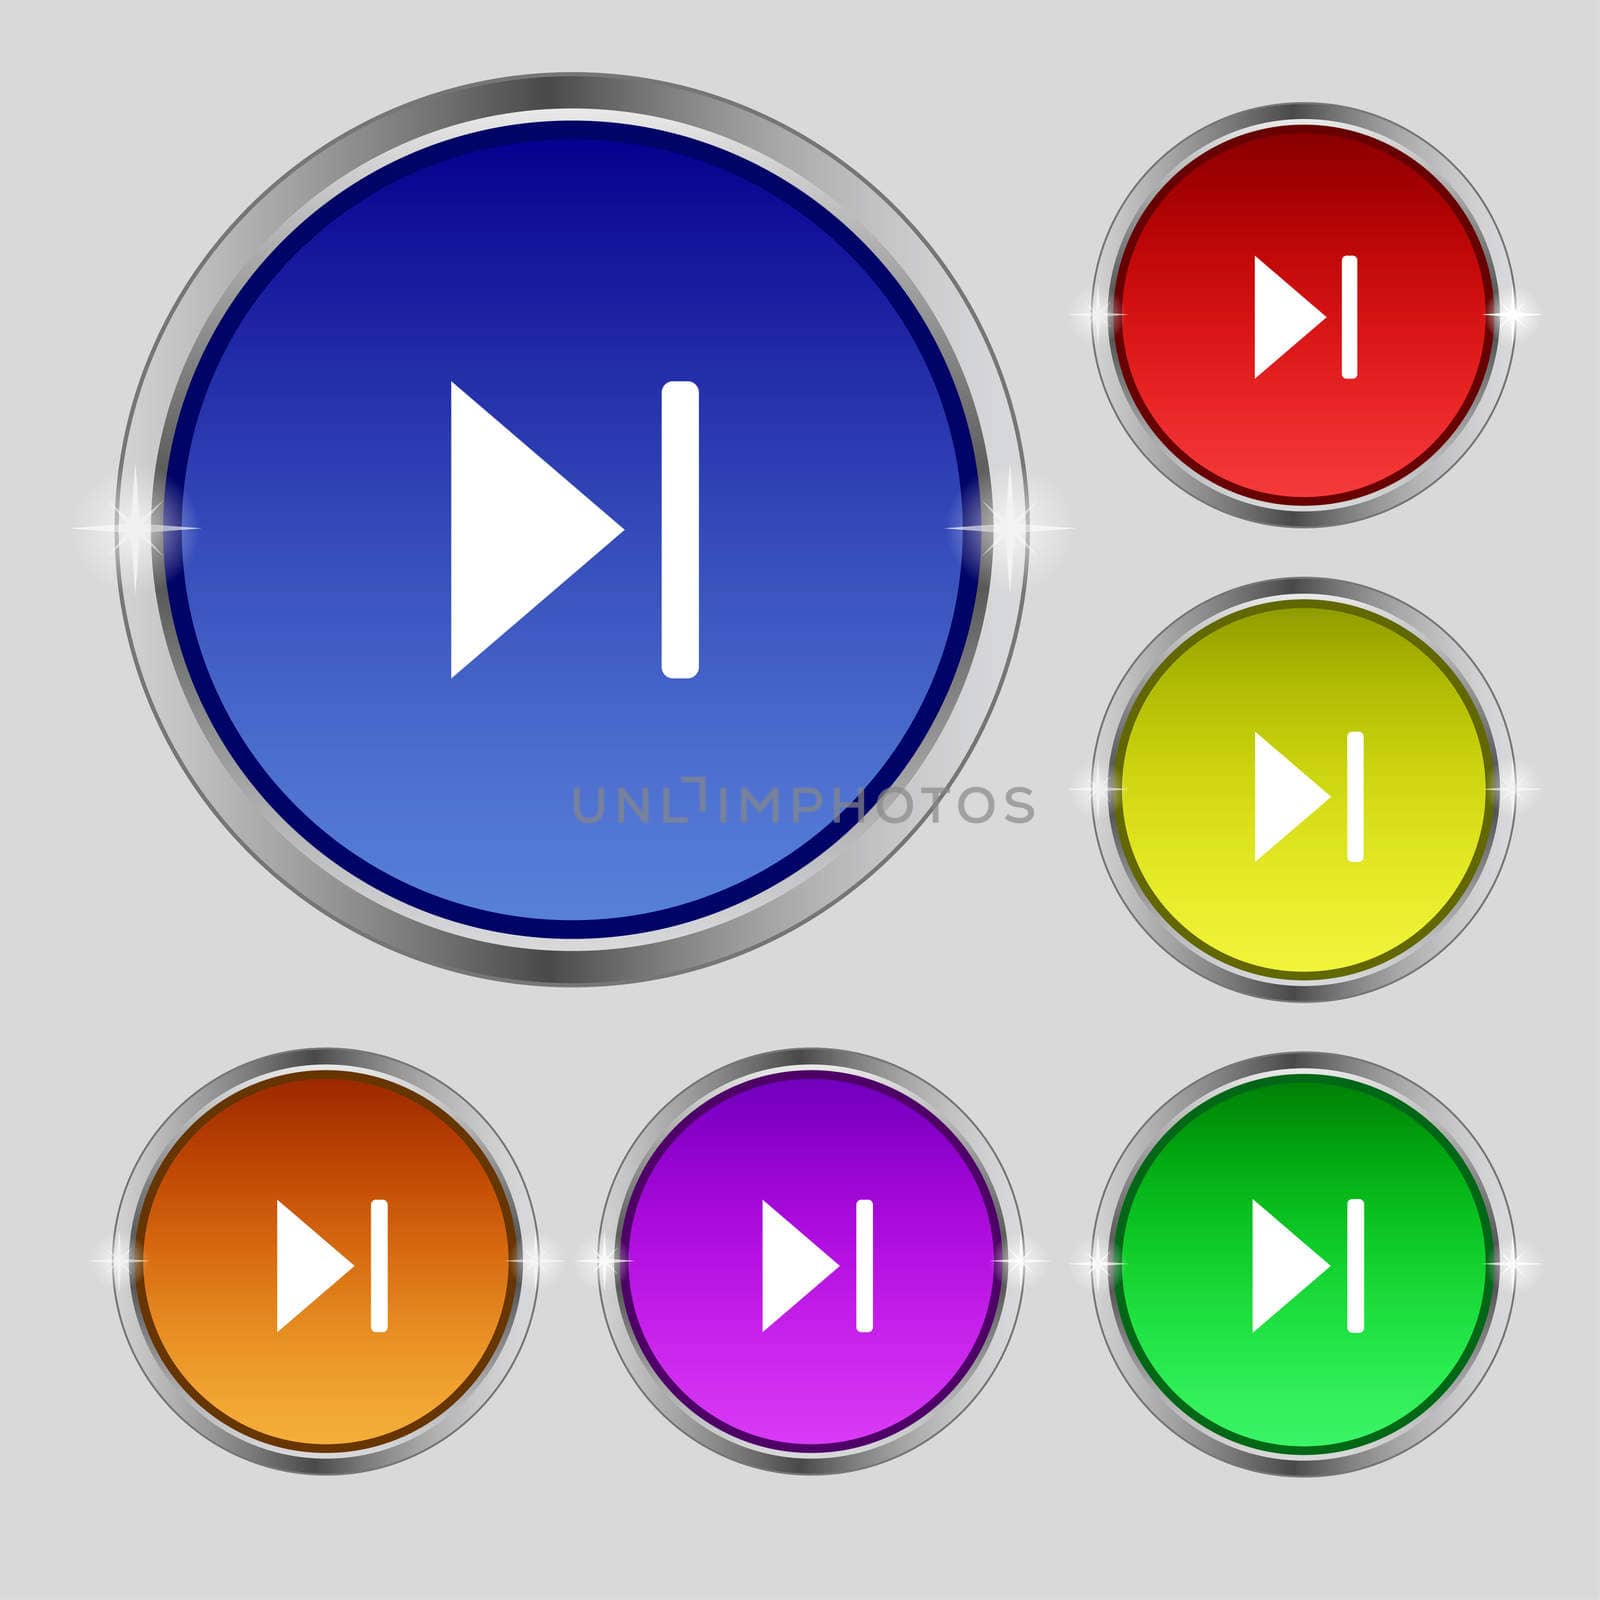 next track icon sign. Round symbol on bright colourful buttons. illustration